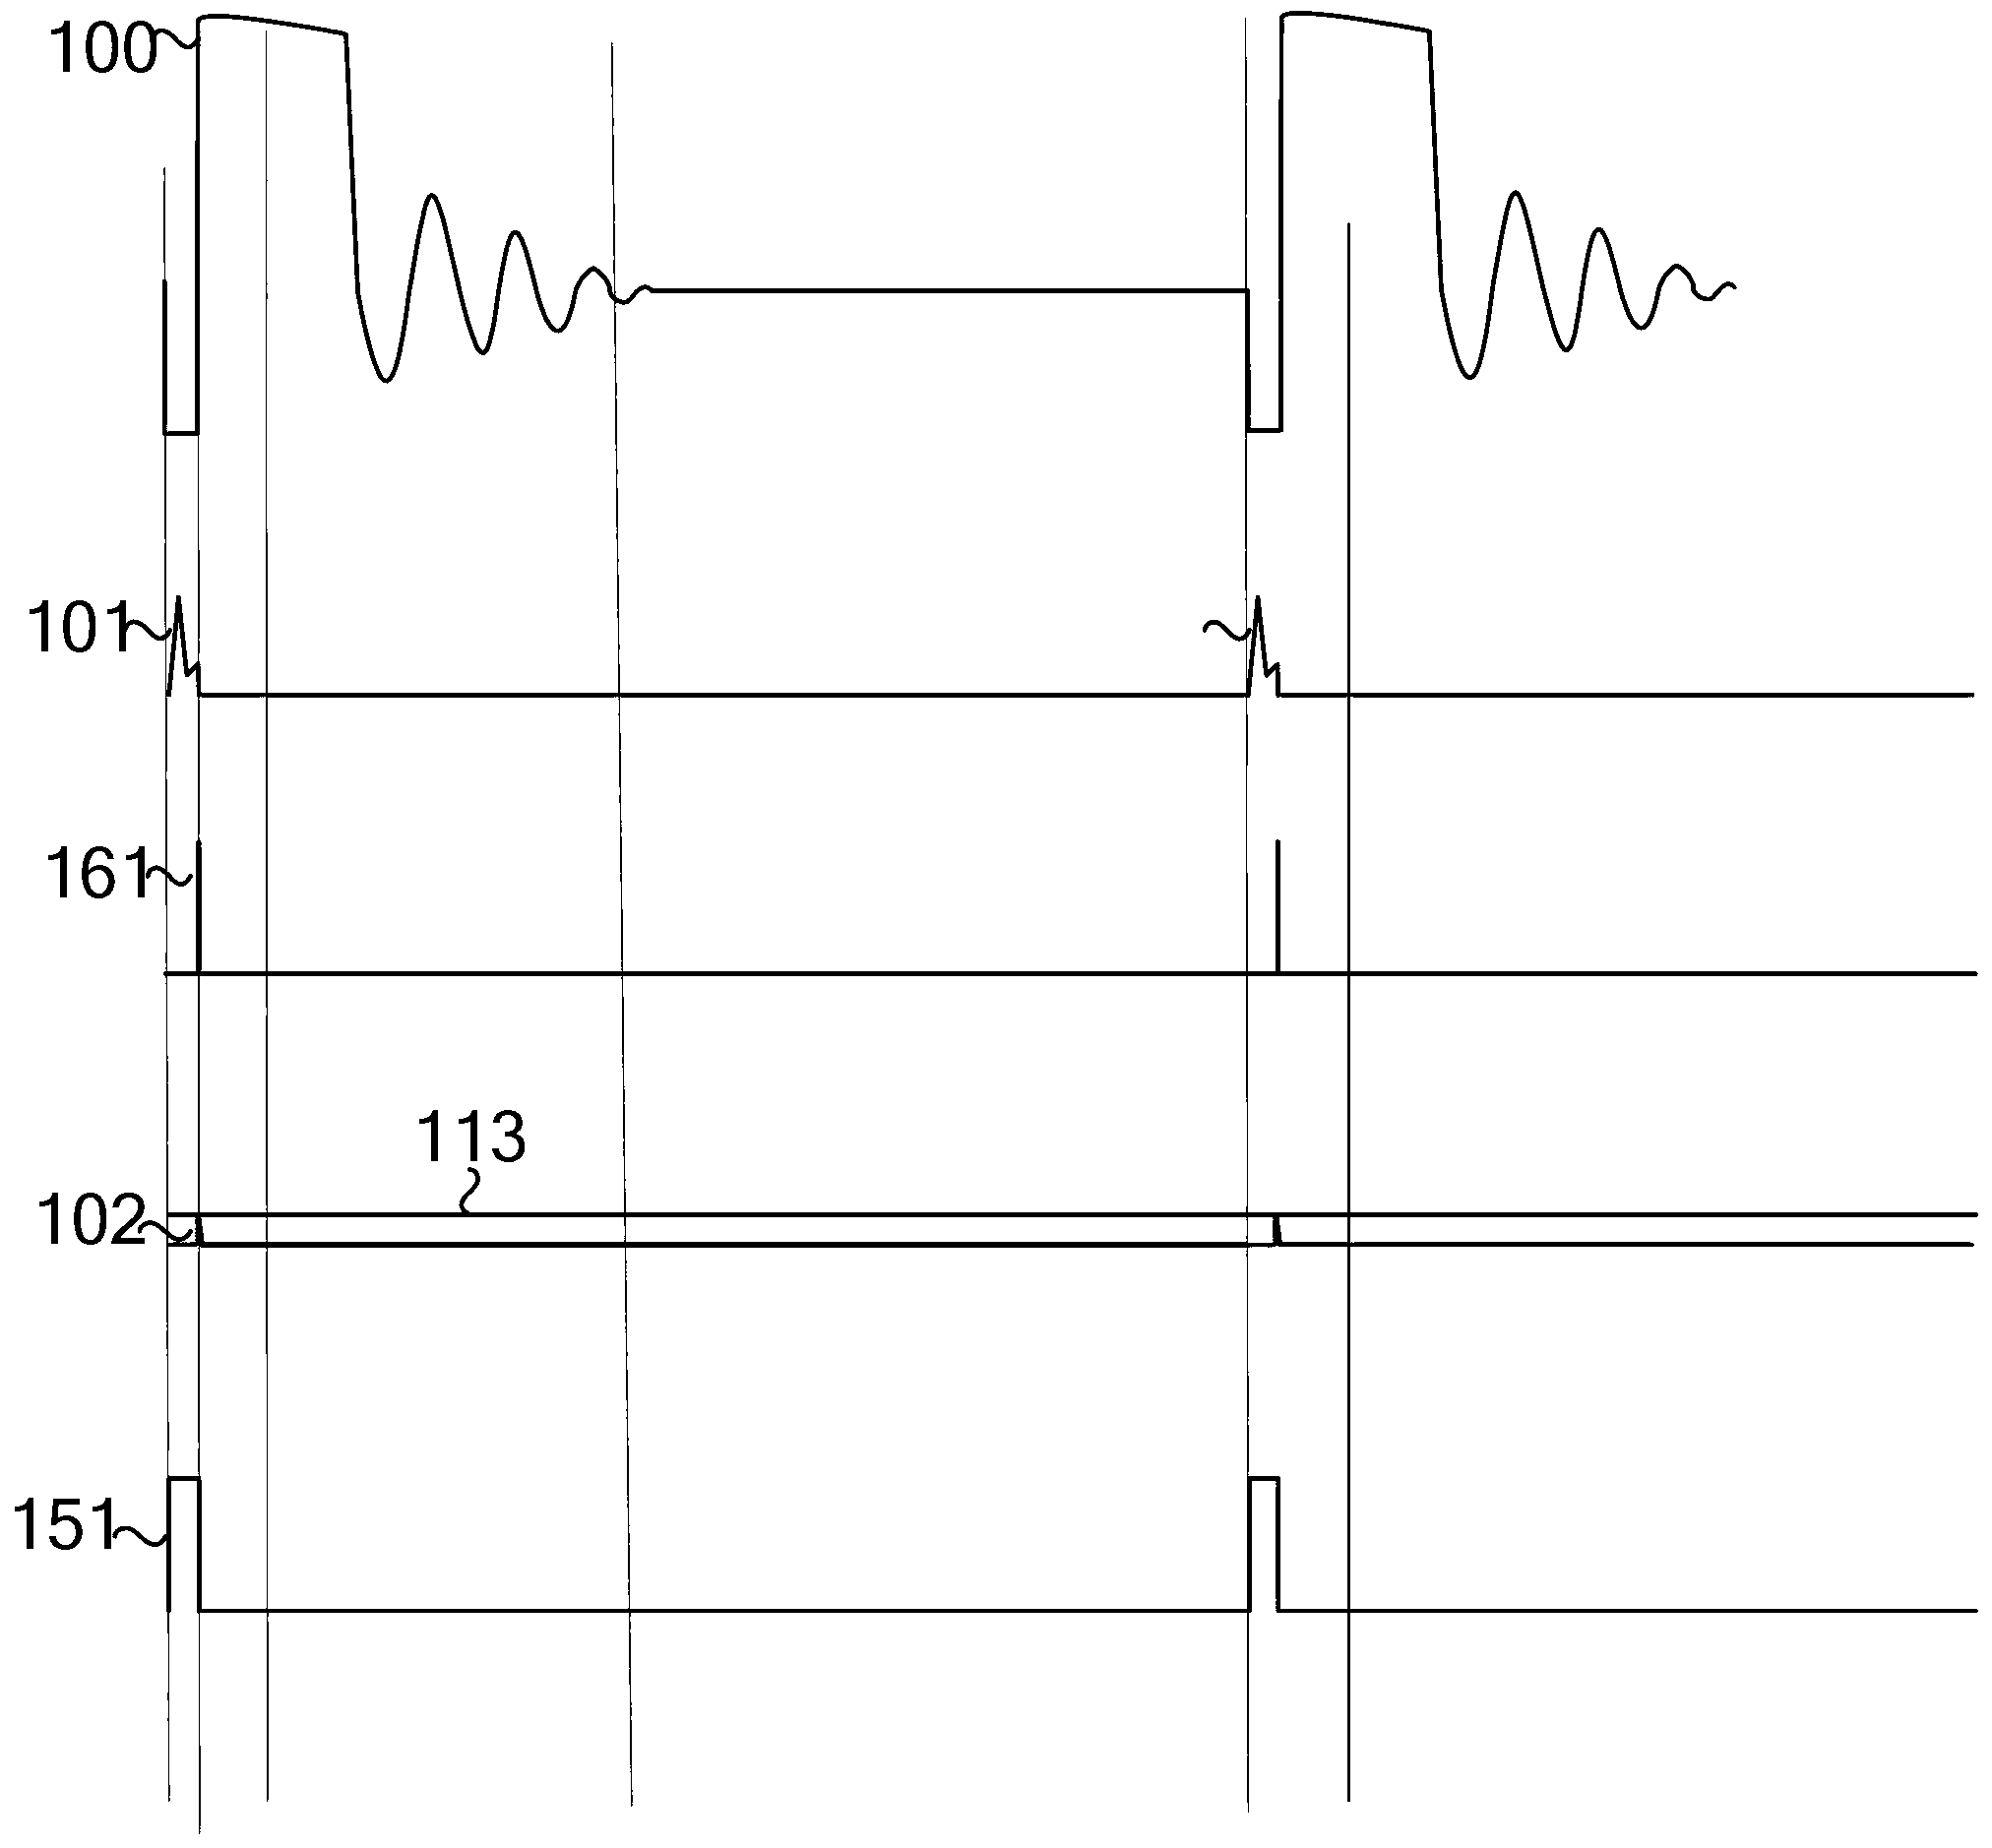 Constant-current and constant-voltage fly-back converter based on primary side feedback